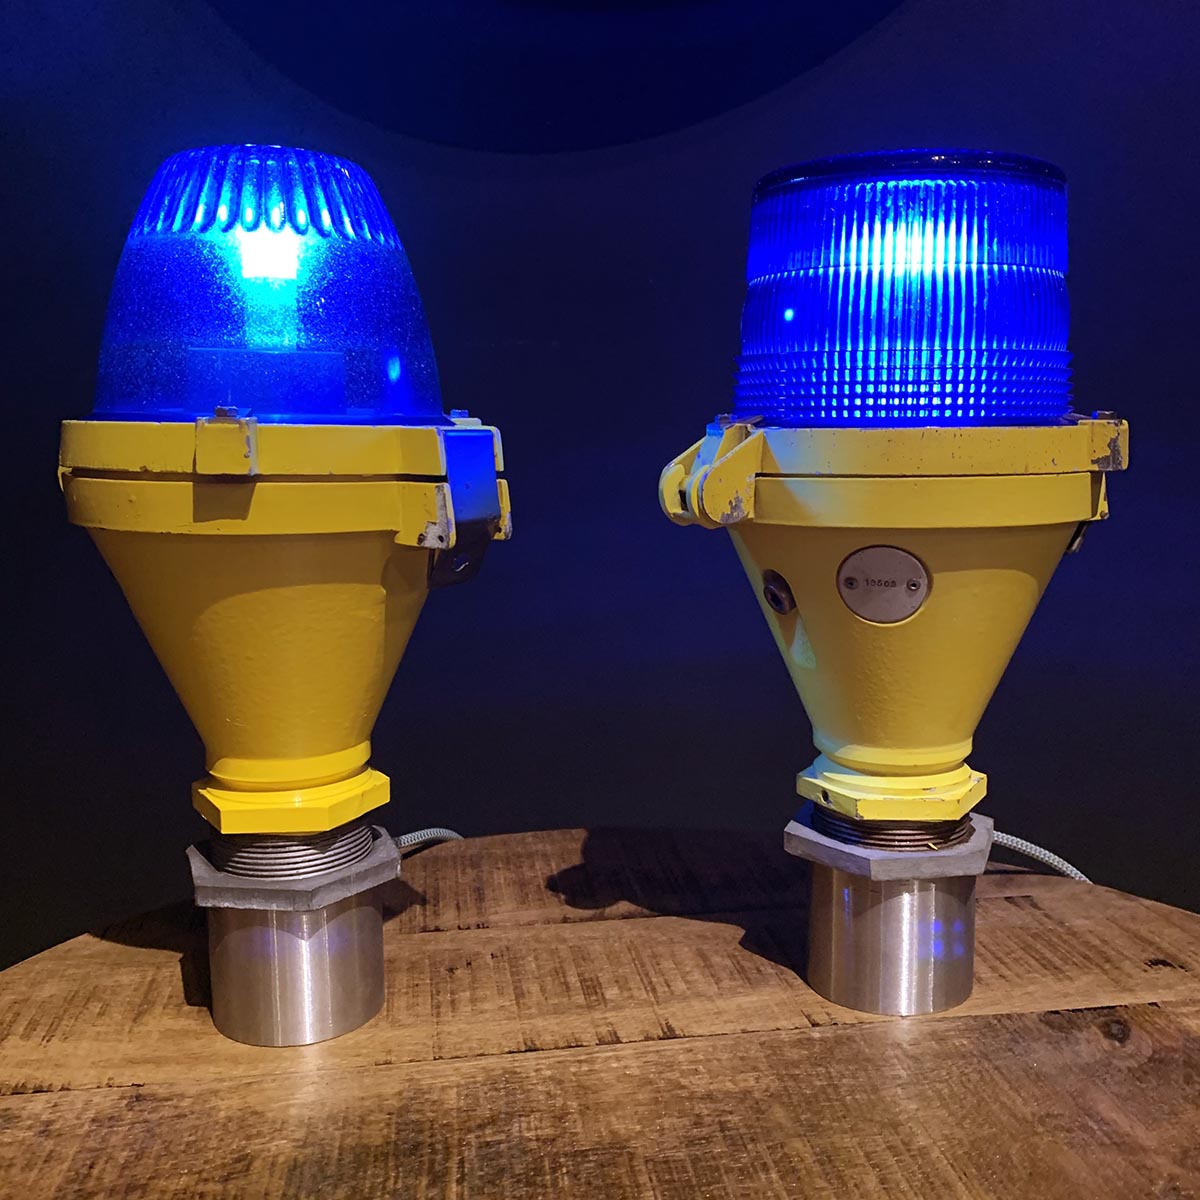 Two Thorn taxiway lights lined up next to each other as decorative lights.